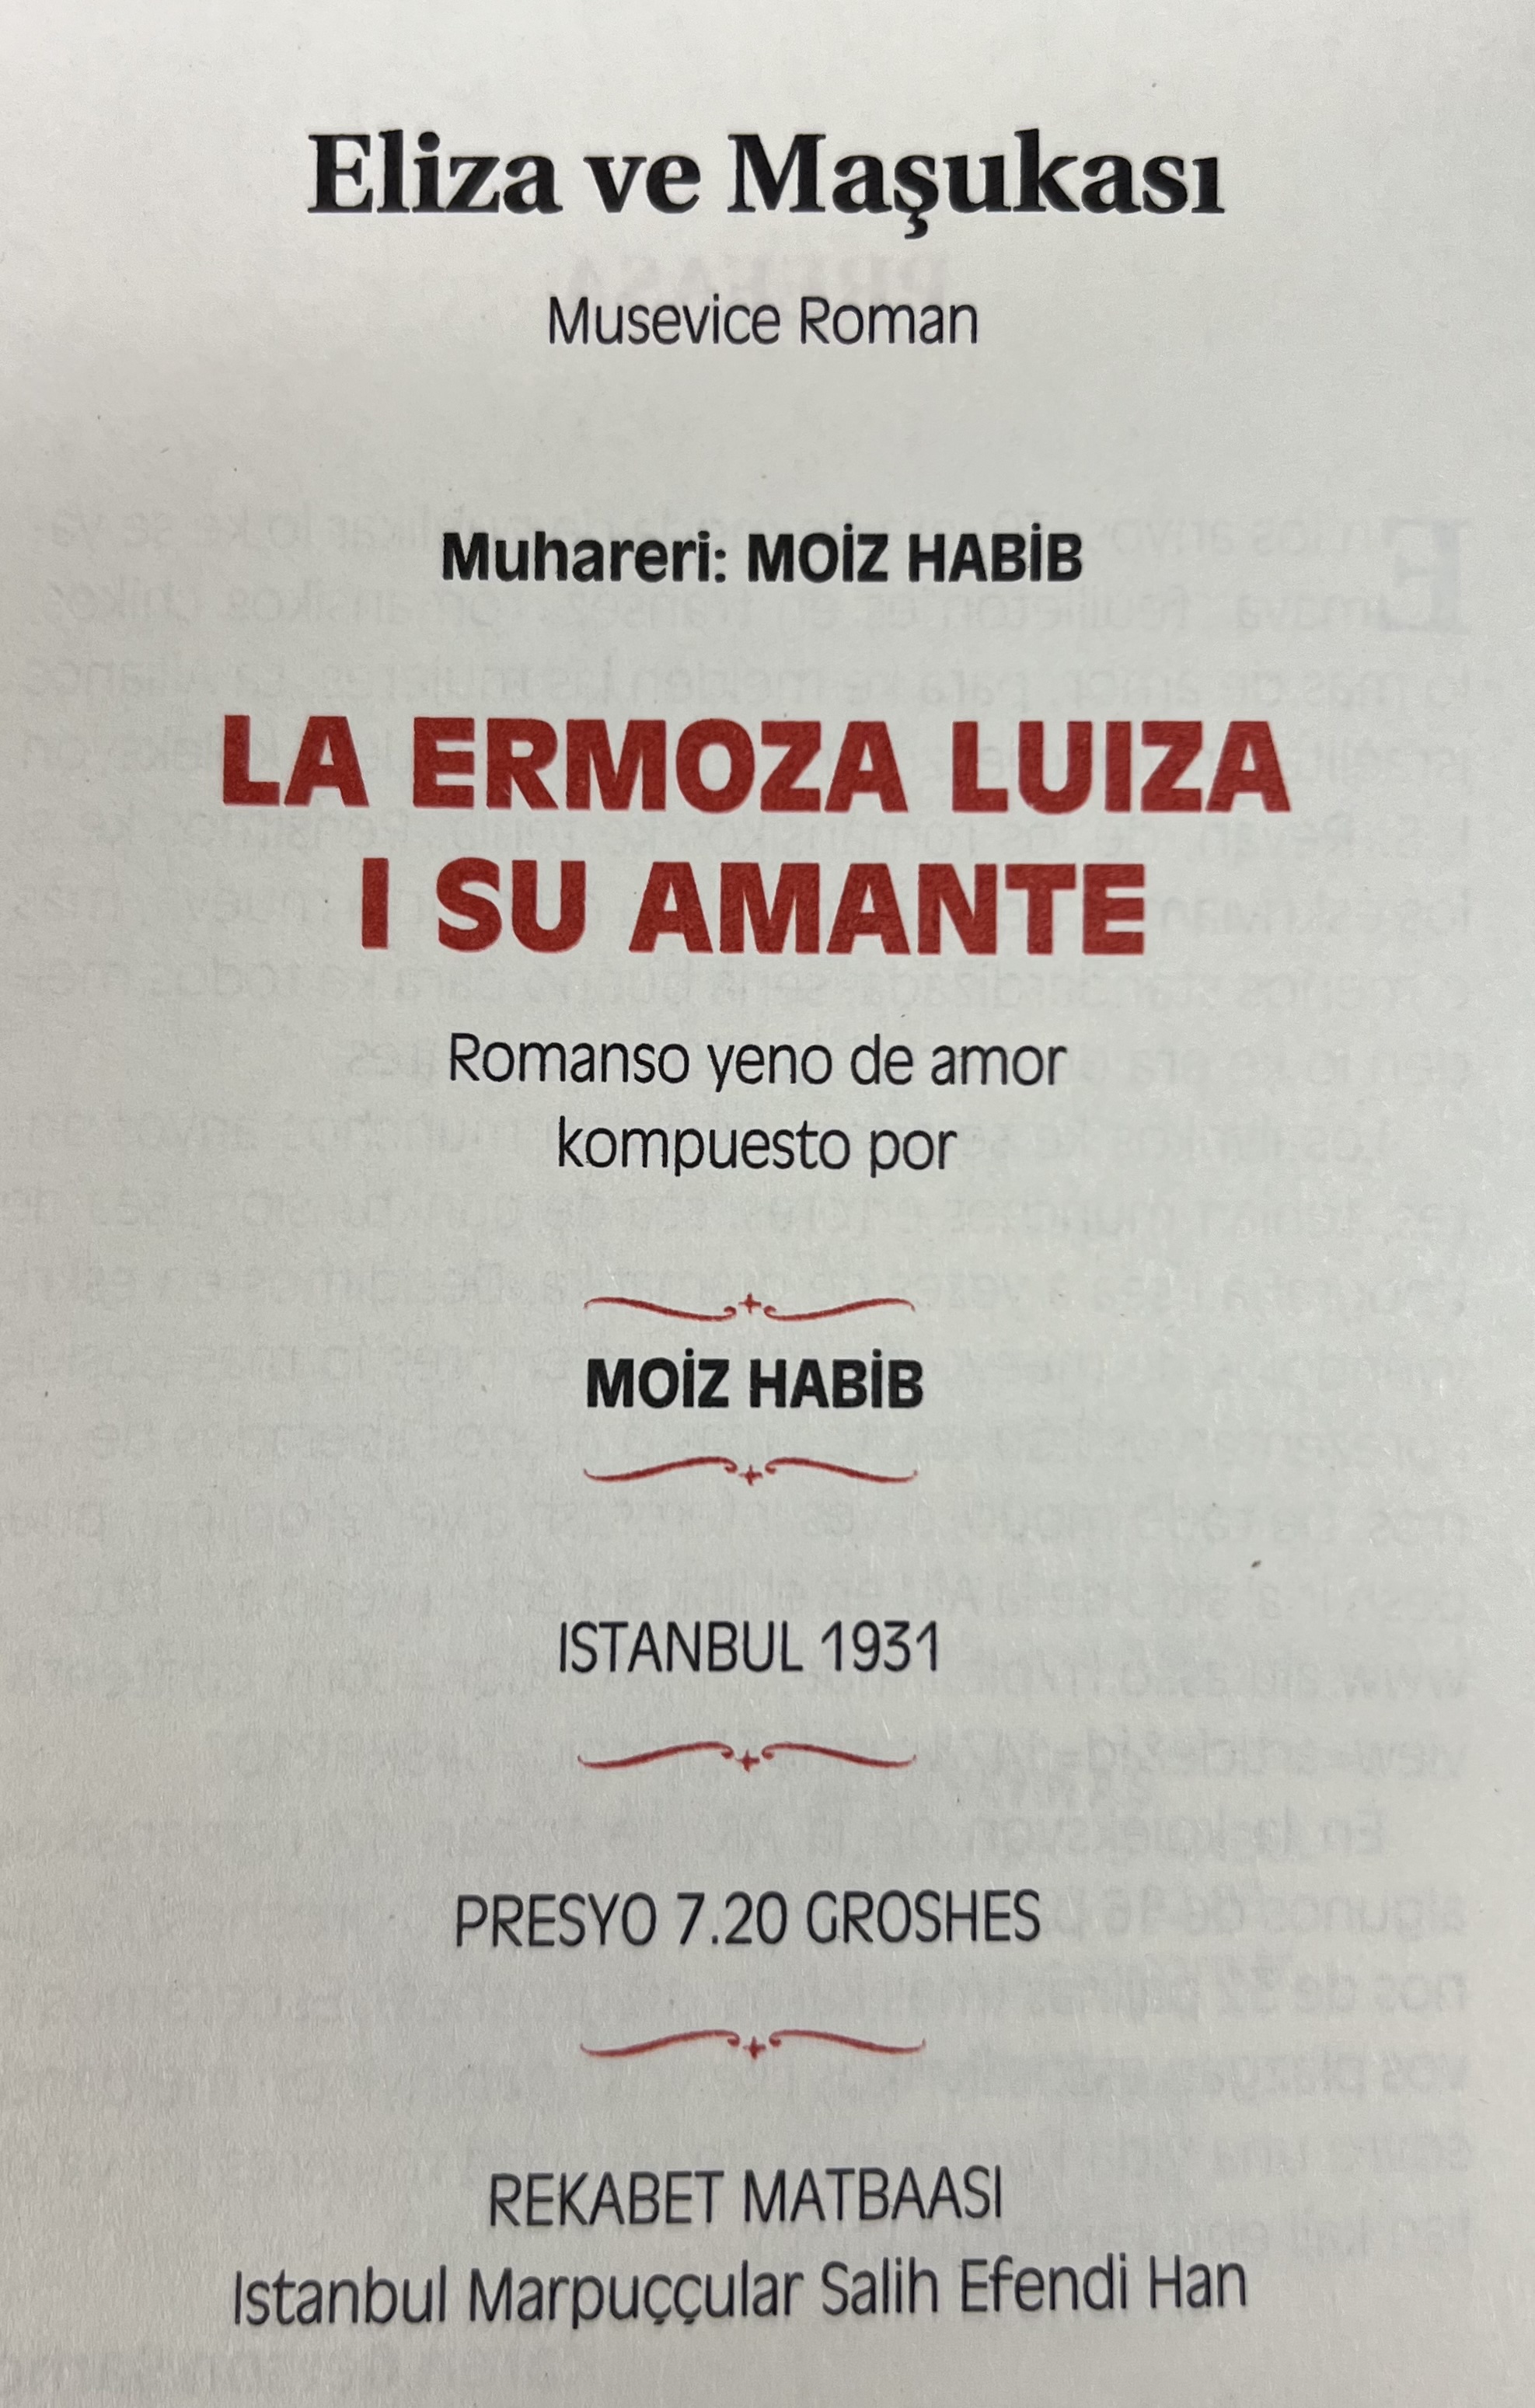 The Verso title page of "La ermoza Luiza i su amante," a ladino novel by Moiz Habib originally published in Istanbul in 1931. The Turkish translation of the title is also displayed. 